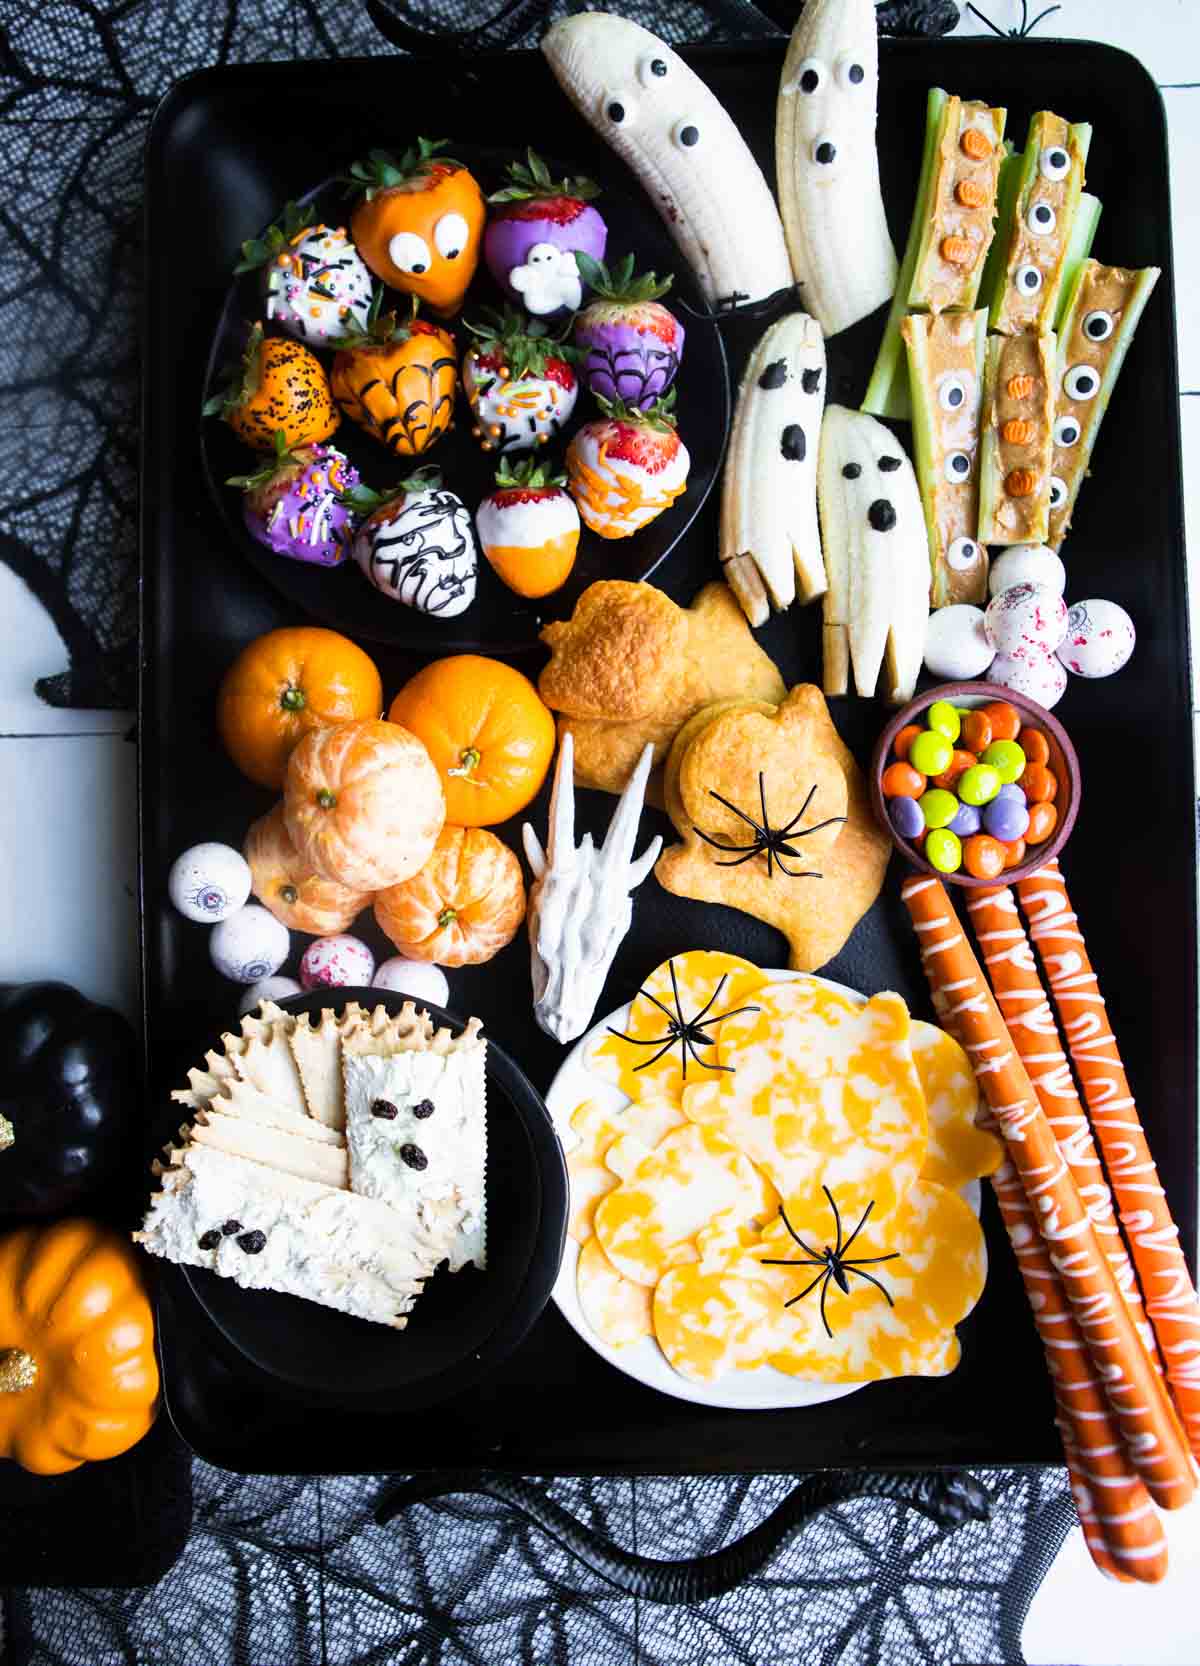 various Halloween snacks, treats and candy on a black metal tray